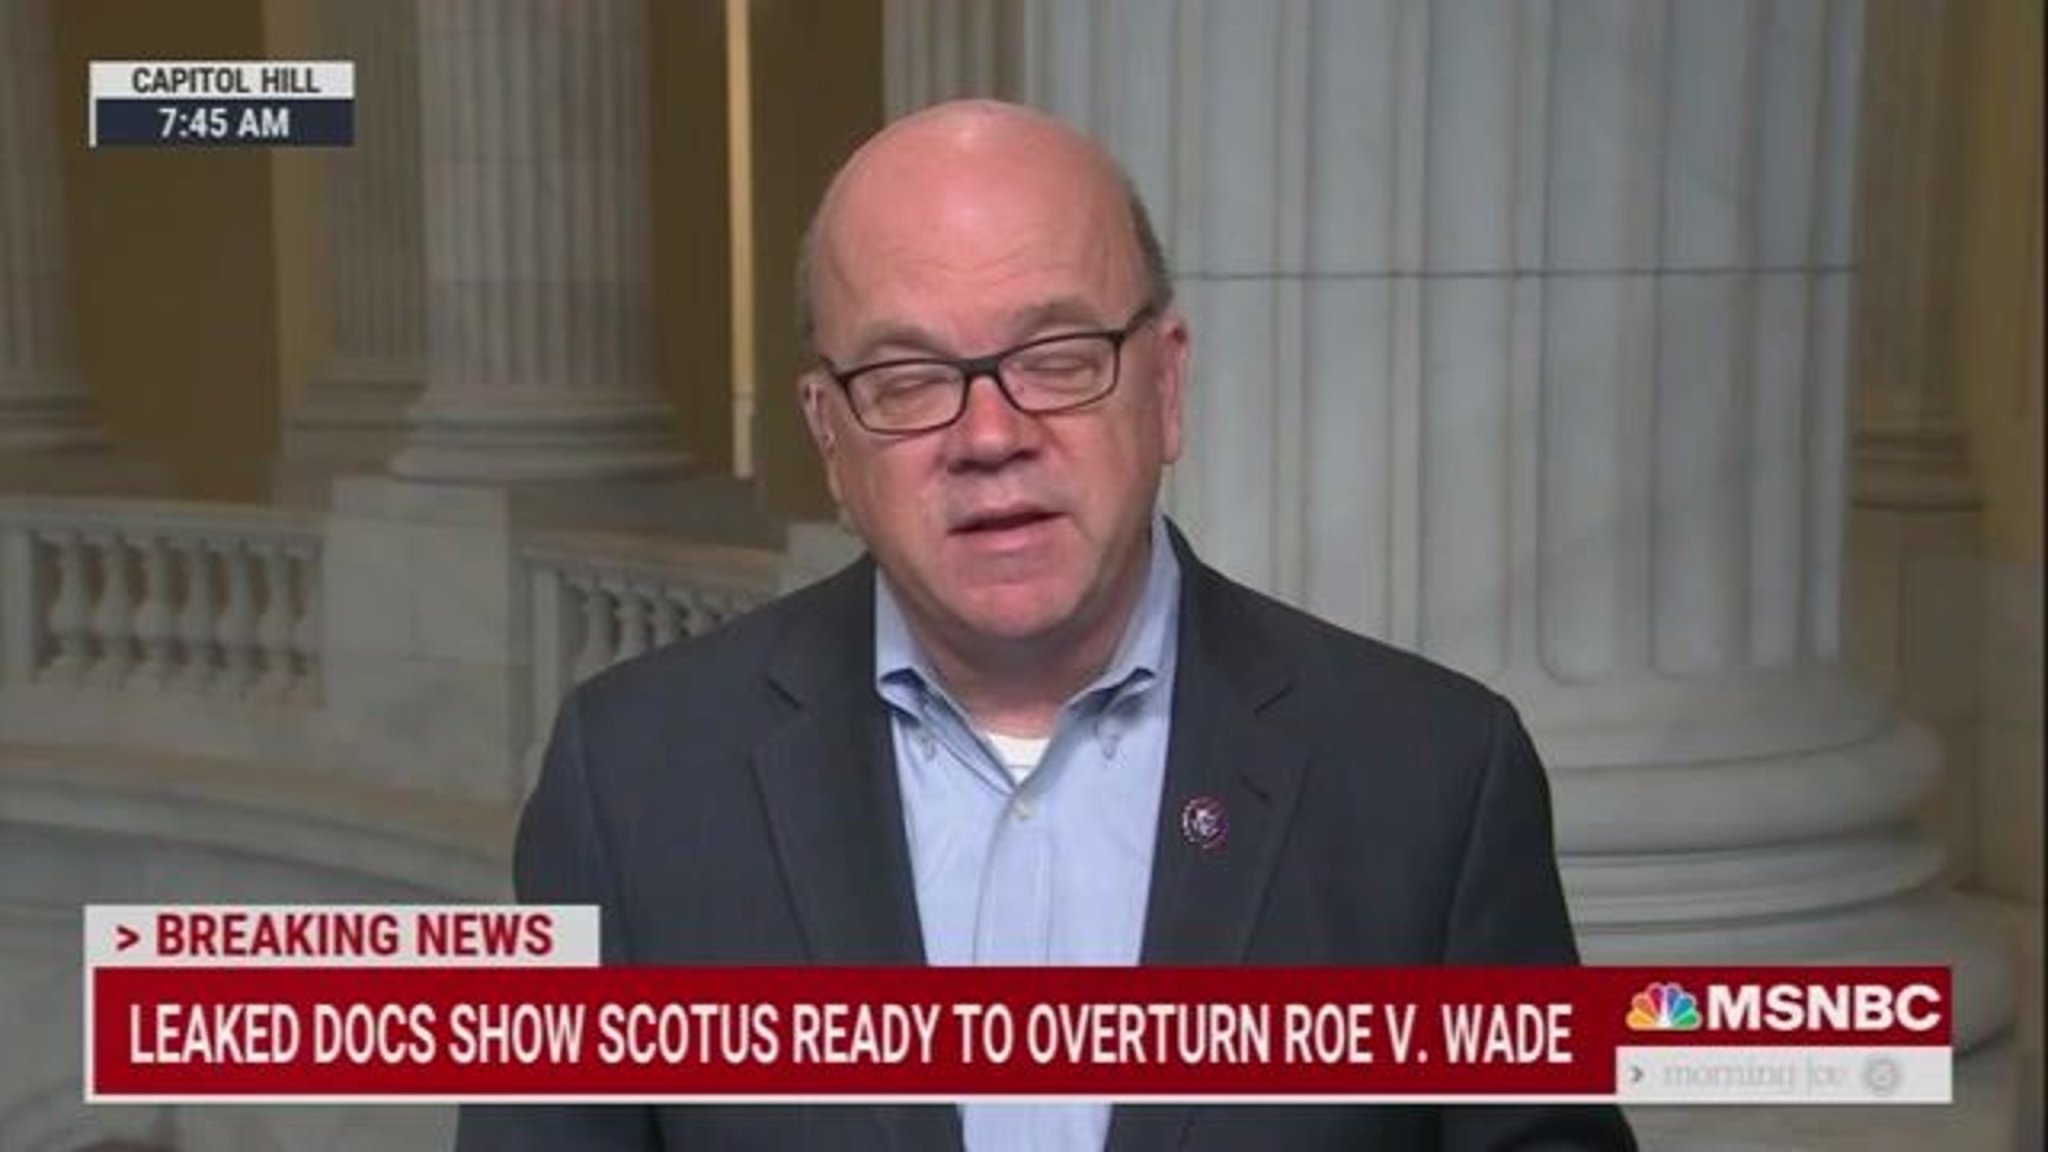 Rep. McGovern (D-MA) on SCOTUS threatening Roe v. Wade: "They want to turn this country into 'The Handmaid’s Tale.'"